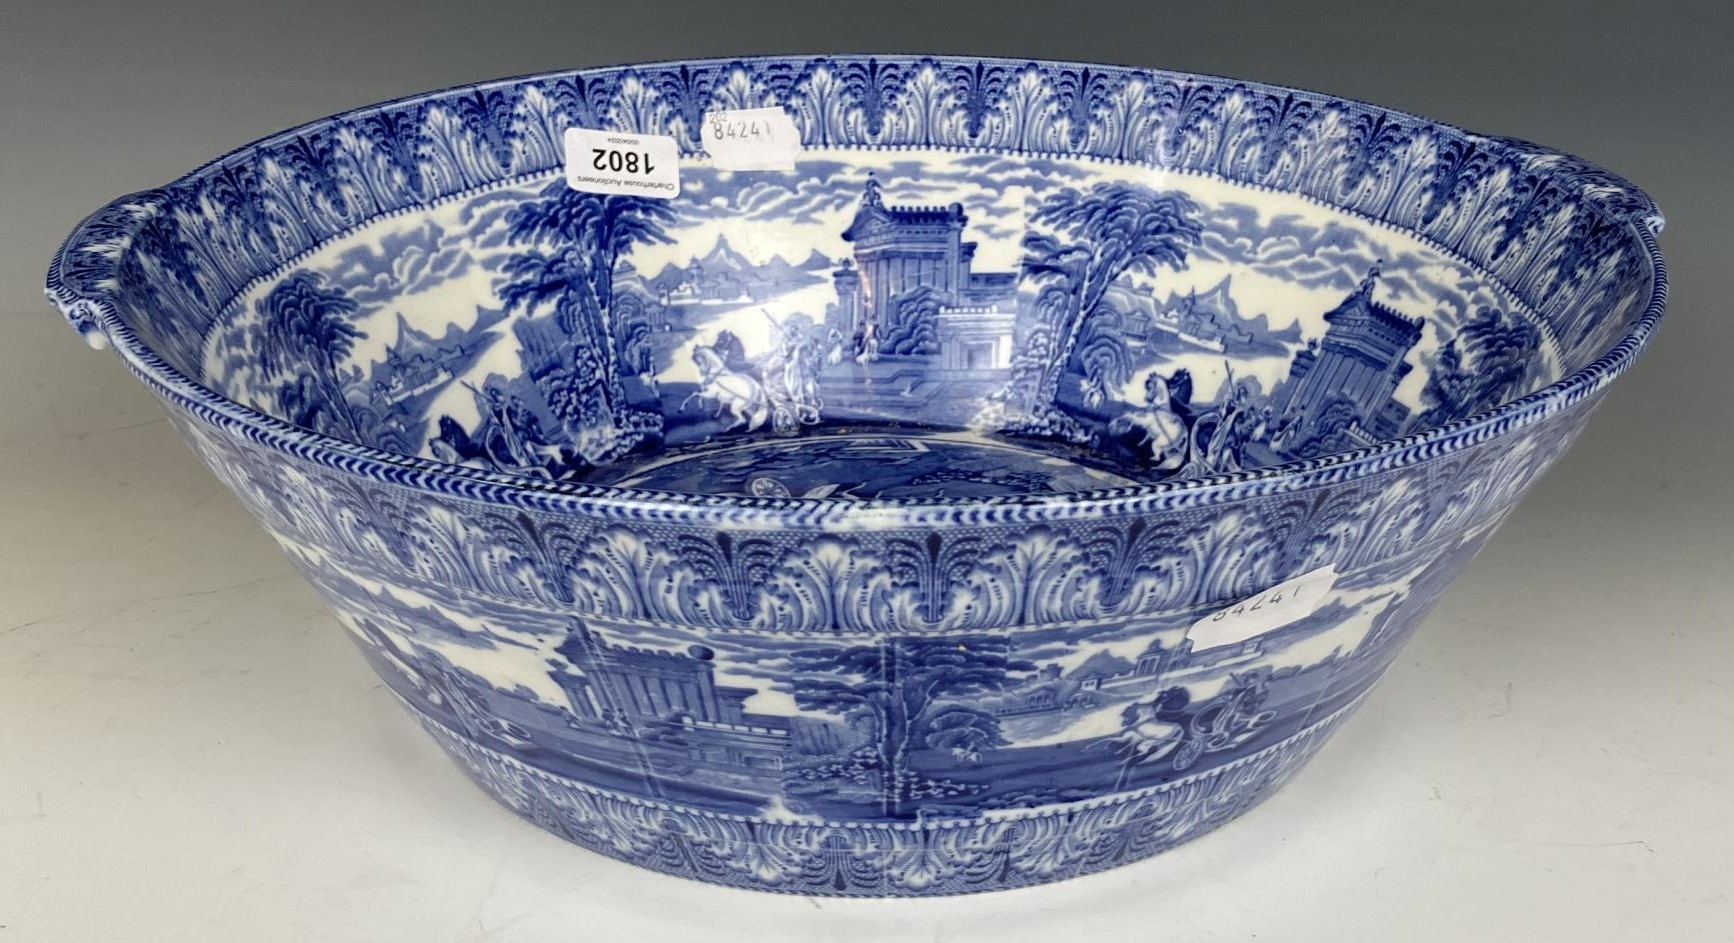 A late 19th century Cauldon blue and white basin or cream pan, decorated classical scenes, 40 cm